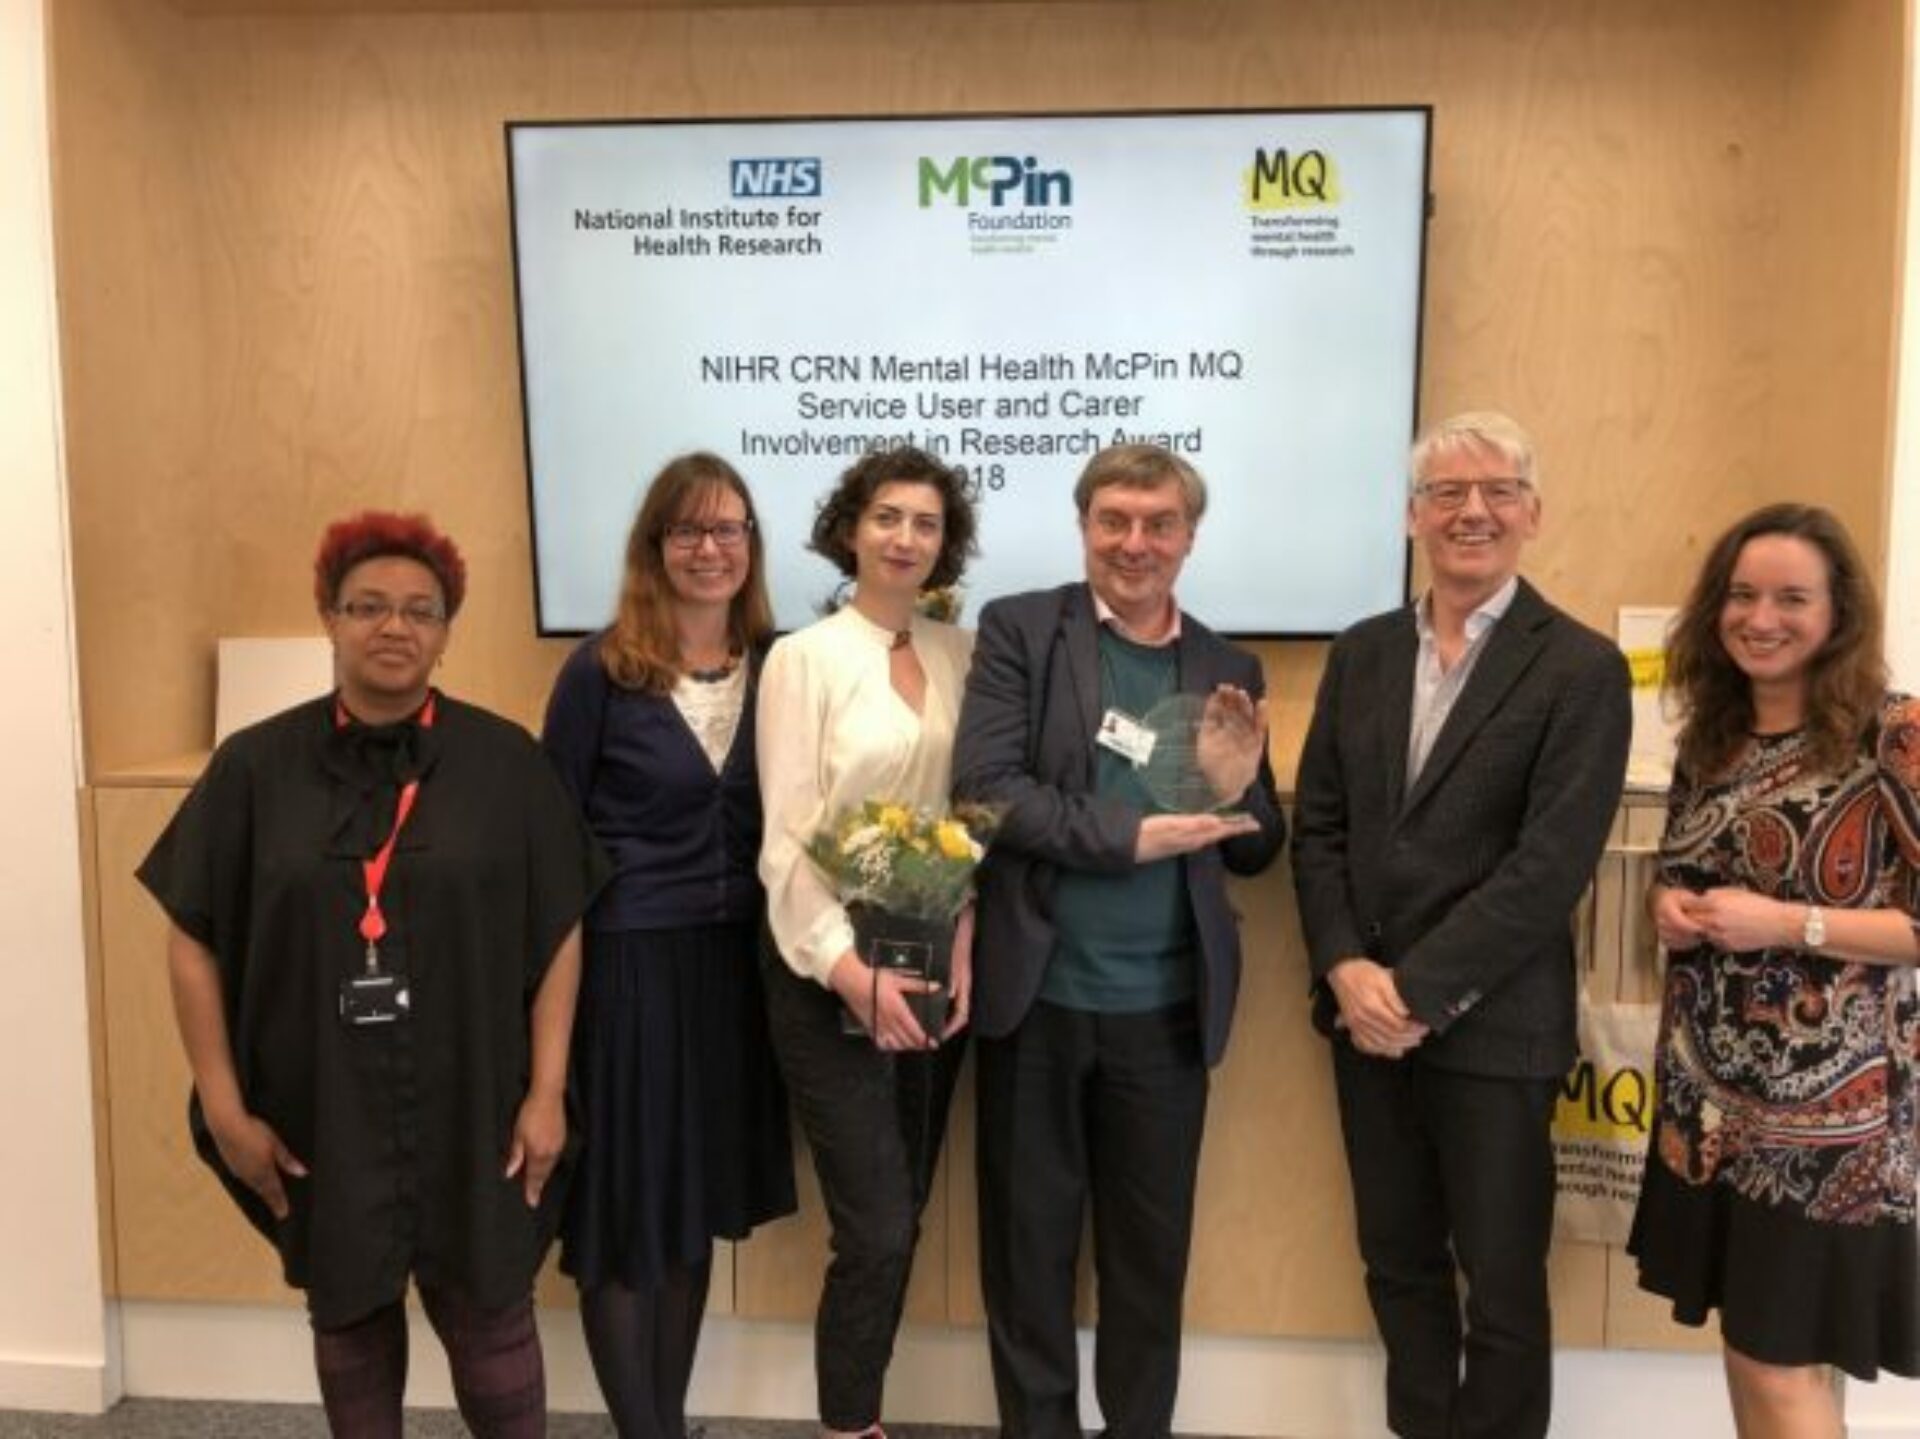 A group of people in front of a screen which reads 'NIHR CRN Mental Health McPin MQ Service User and Carer Involvement in Research Award 208'